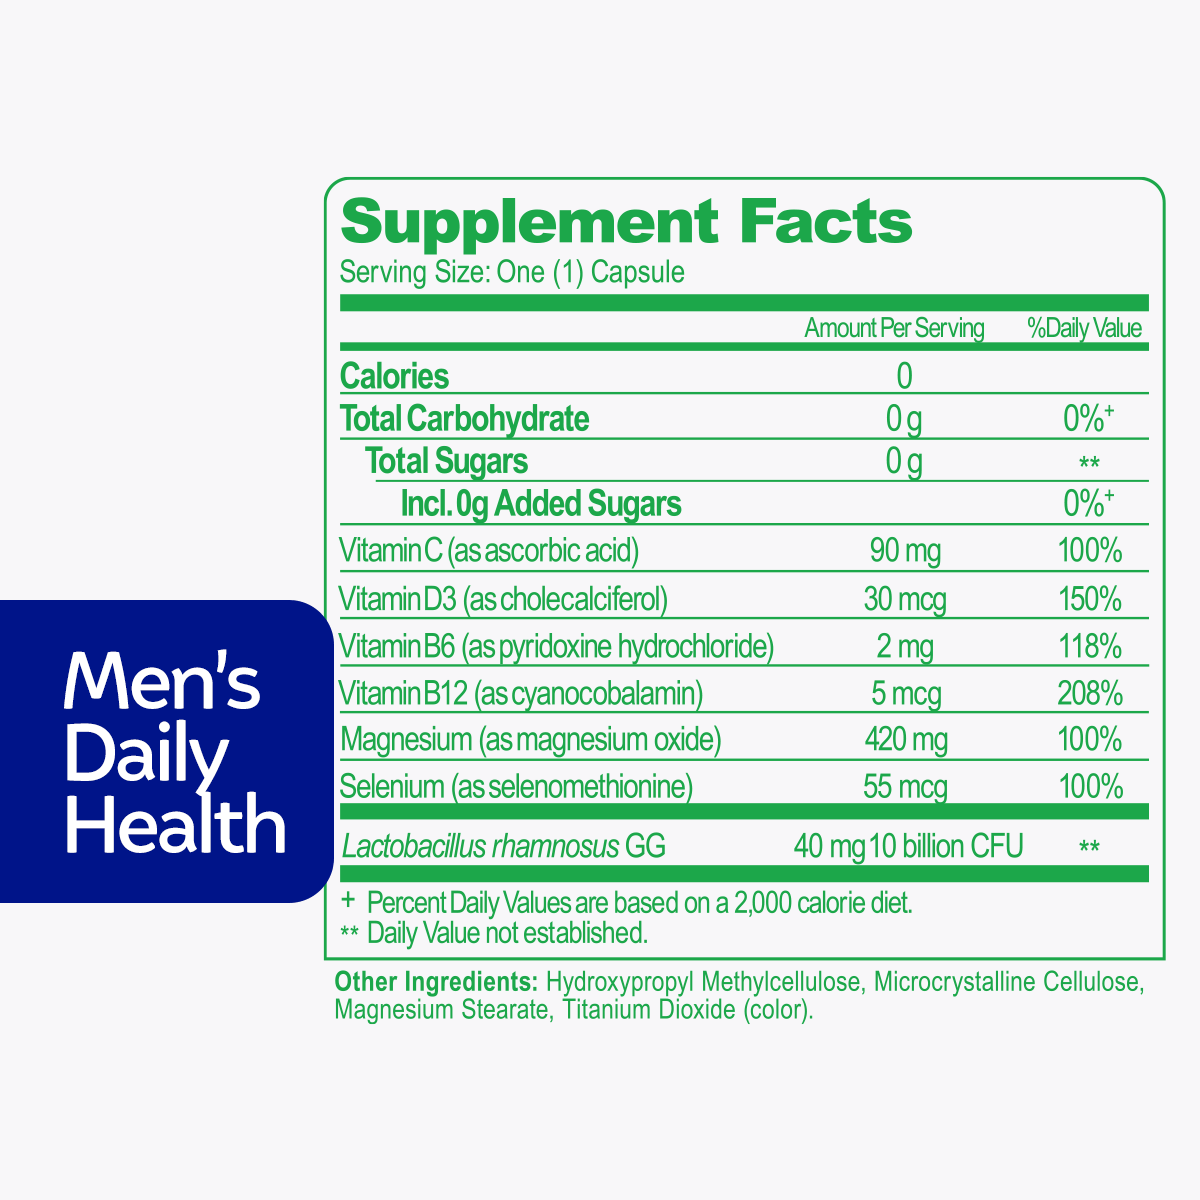 men's daily health supplement facts